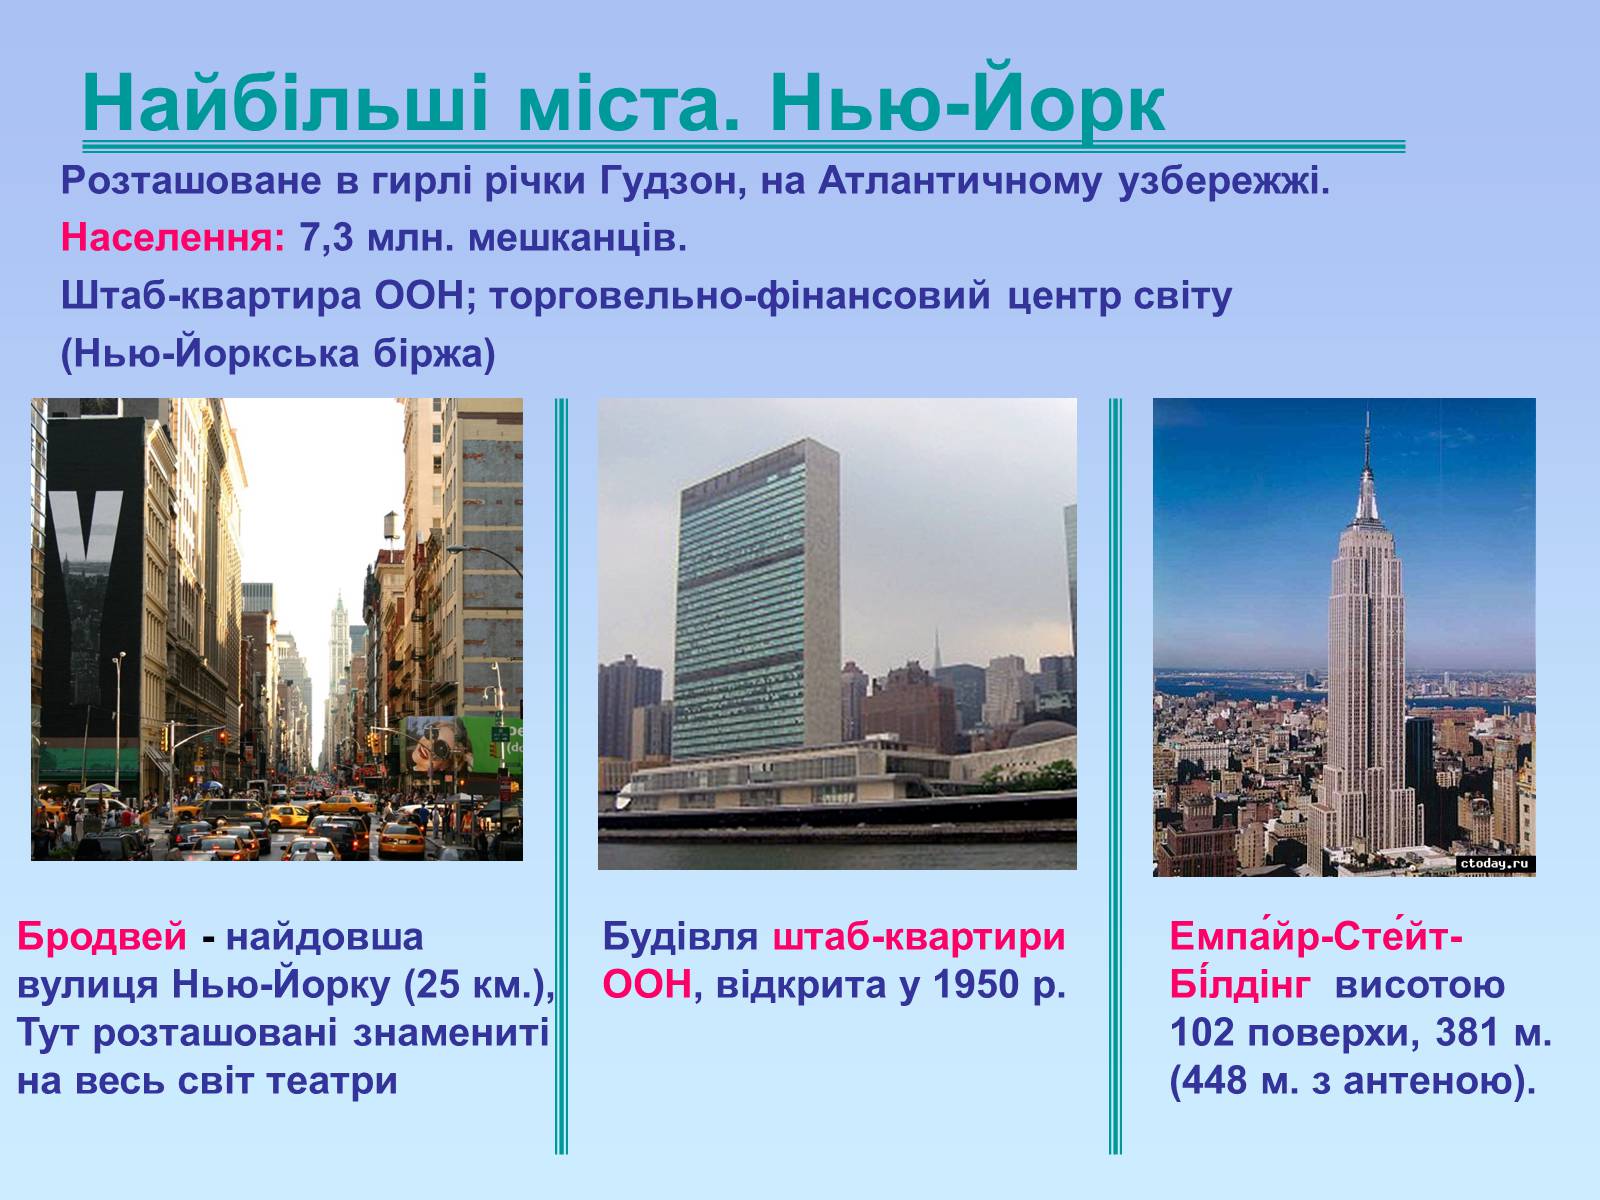 New york is one of the largest cities in the world it was текст фото 14